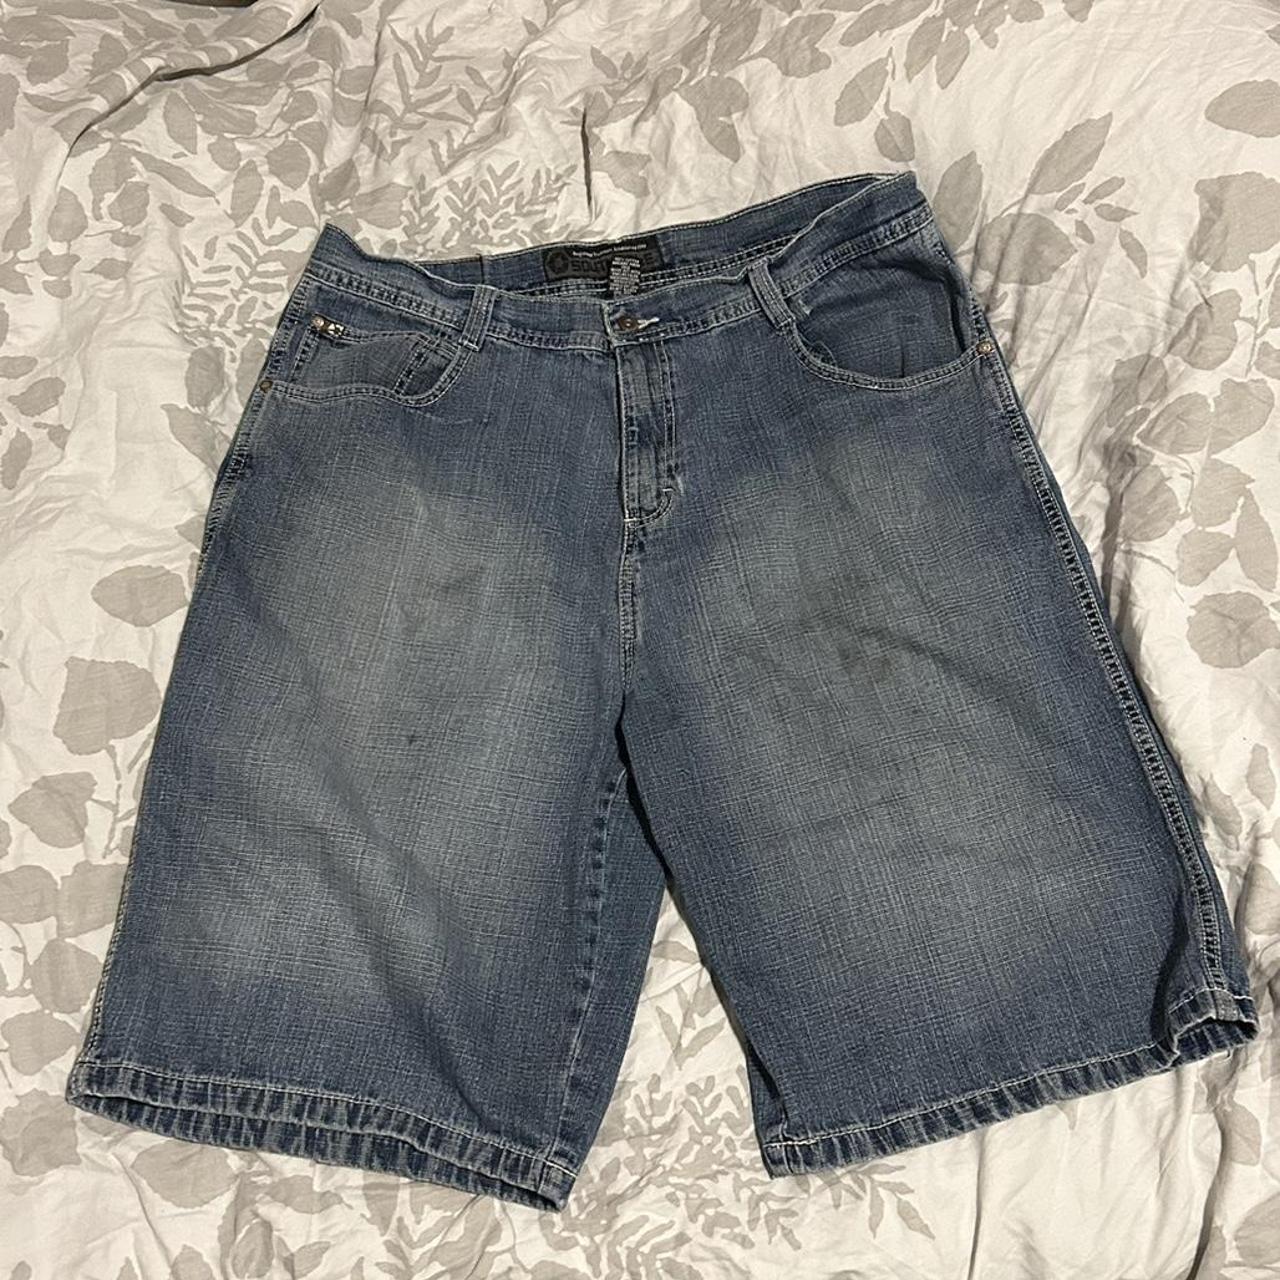 Southpole Men's Grey and Blue Shorts | Depop